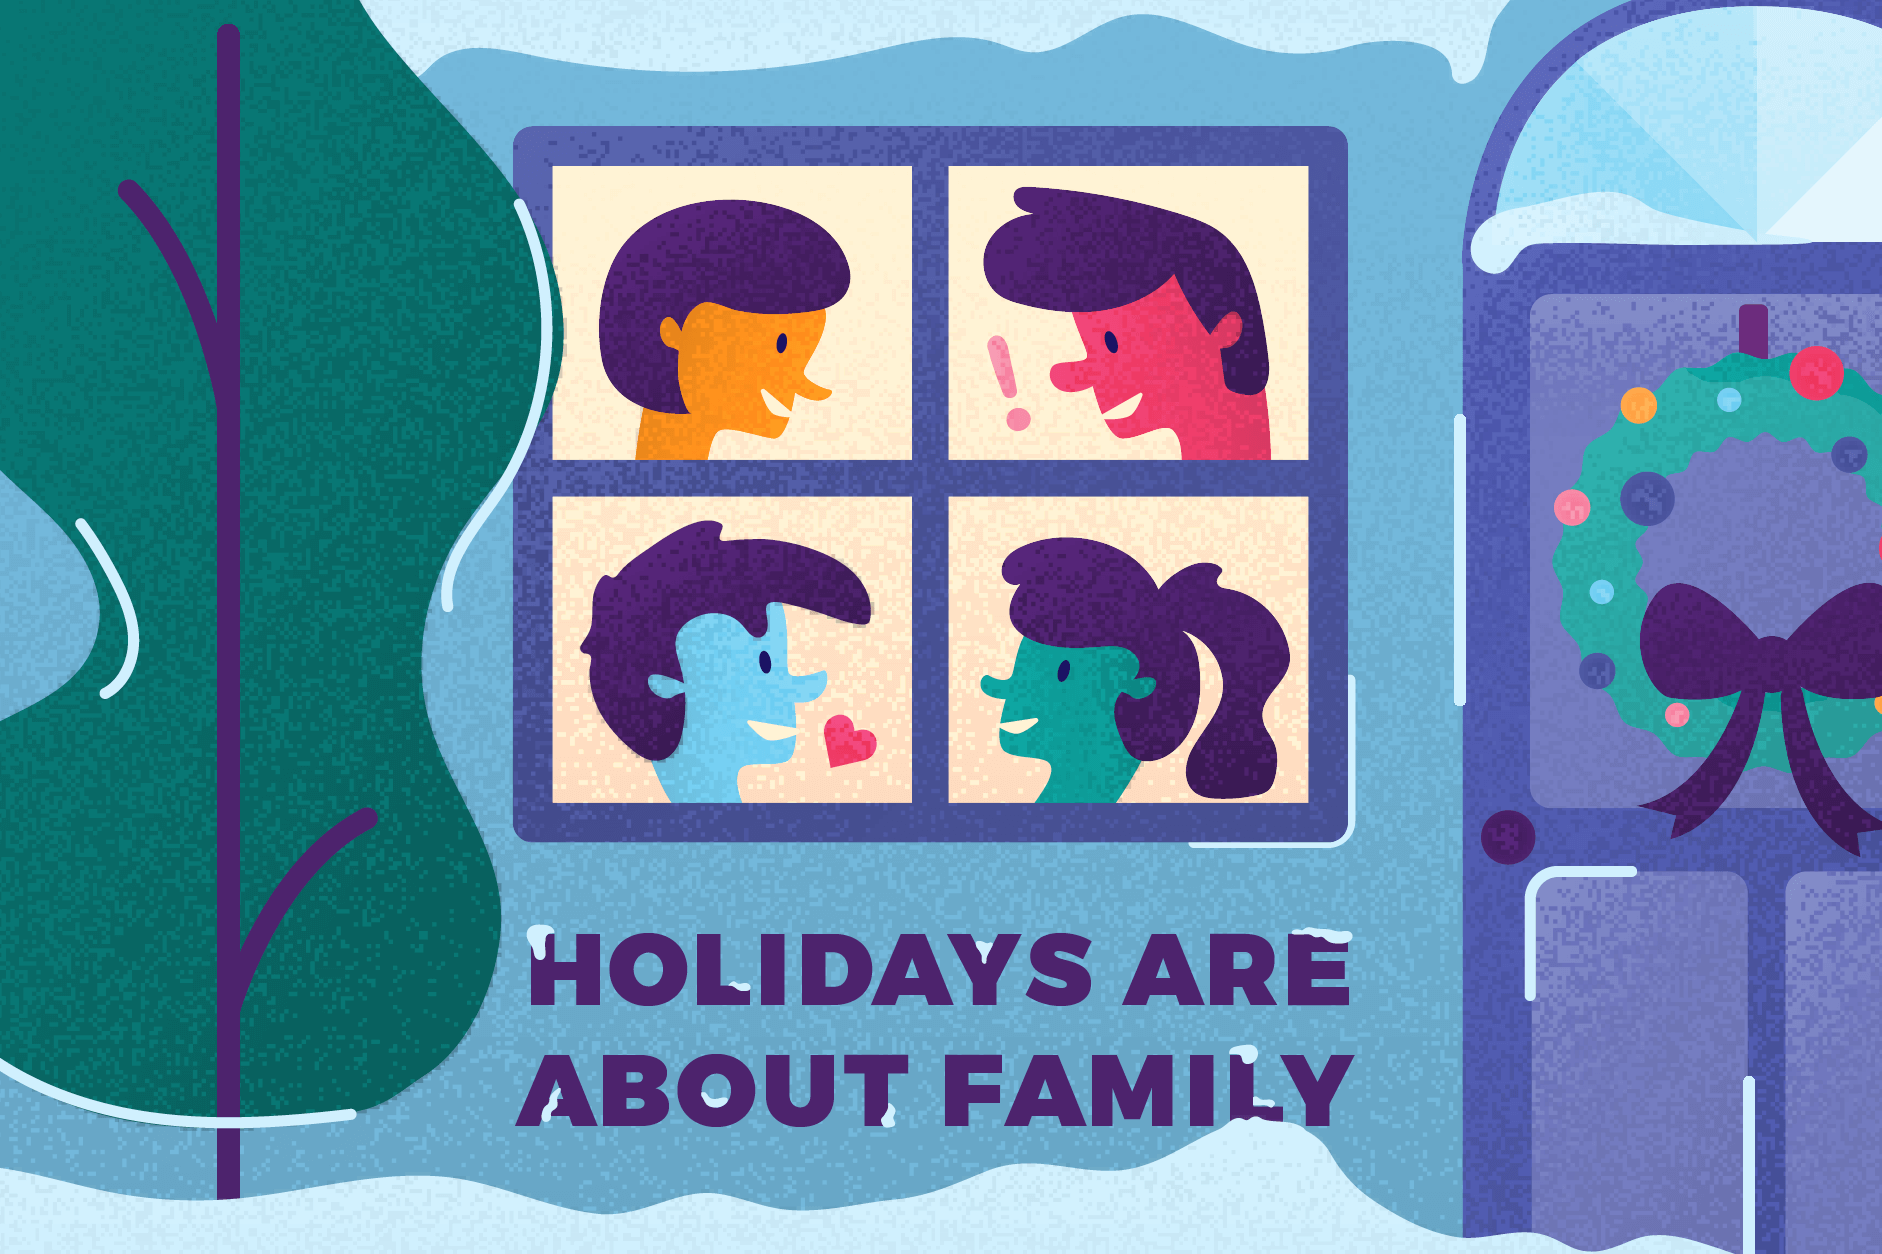 Holidays are about family holiday card